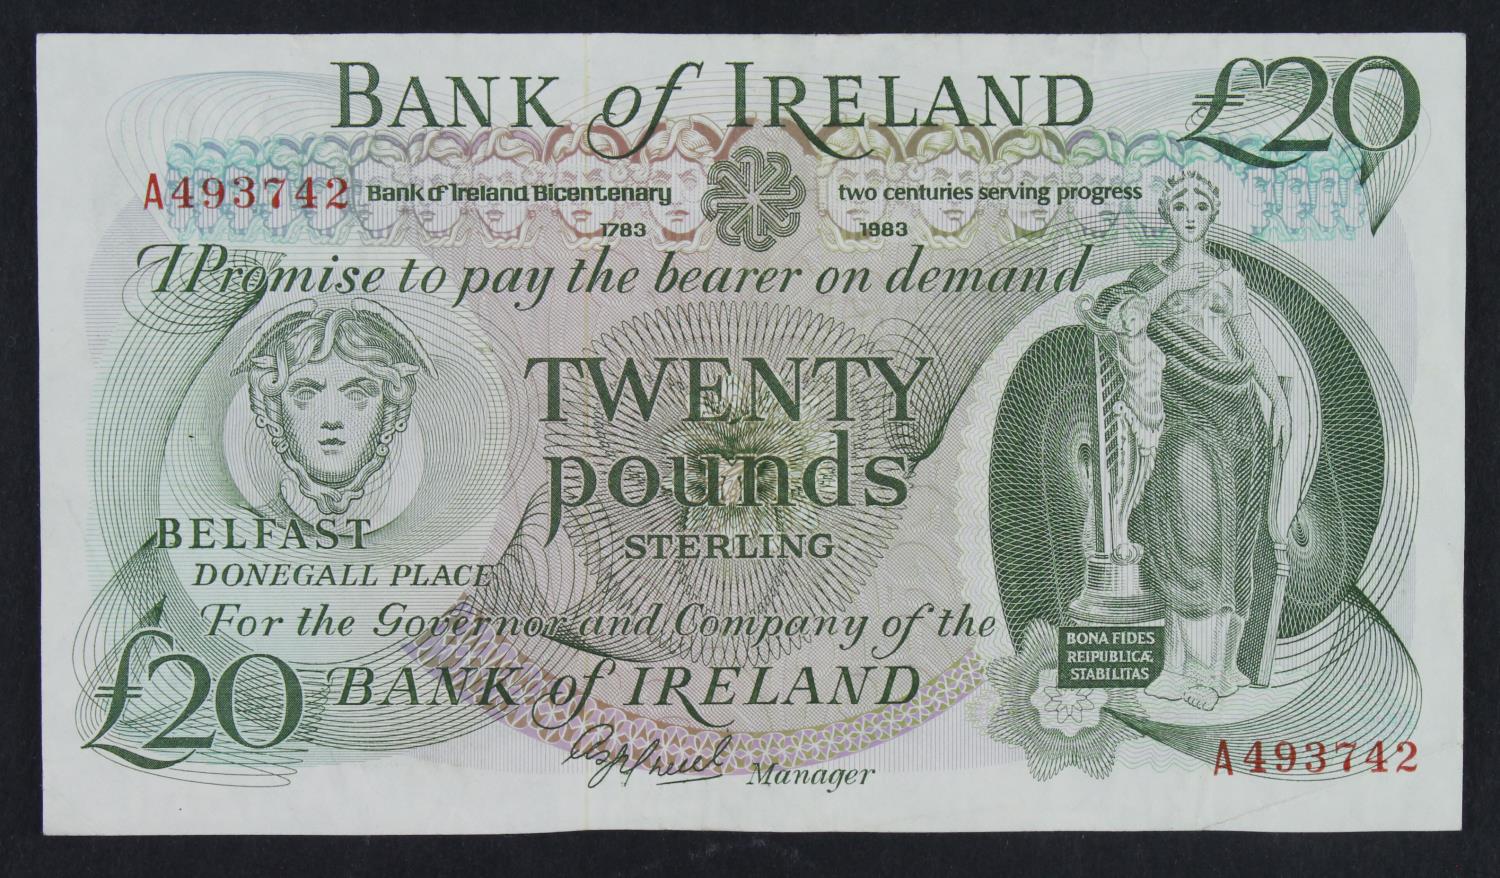 Northern Ireland, Bank of Ireland 20 Pounds issued 1983, Commemorative note Bicentenary, signed A.